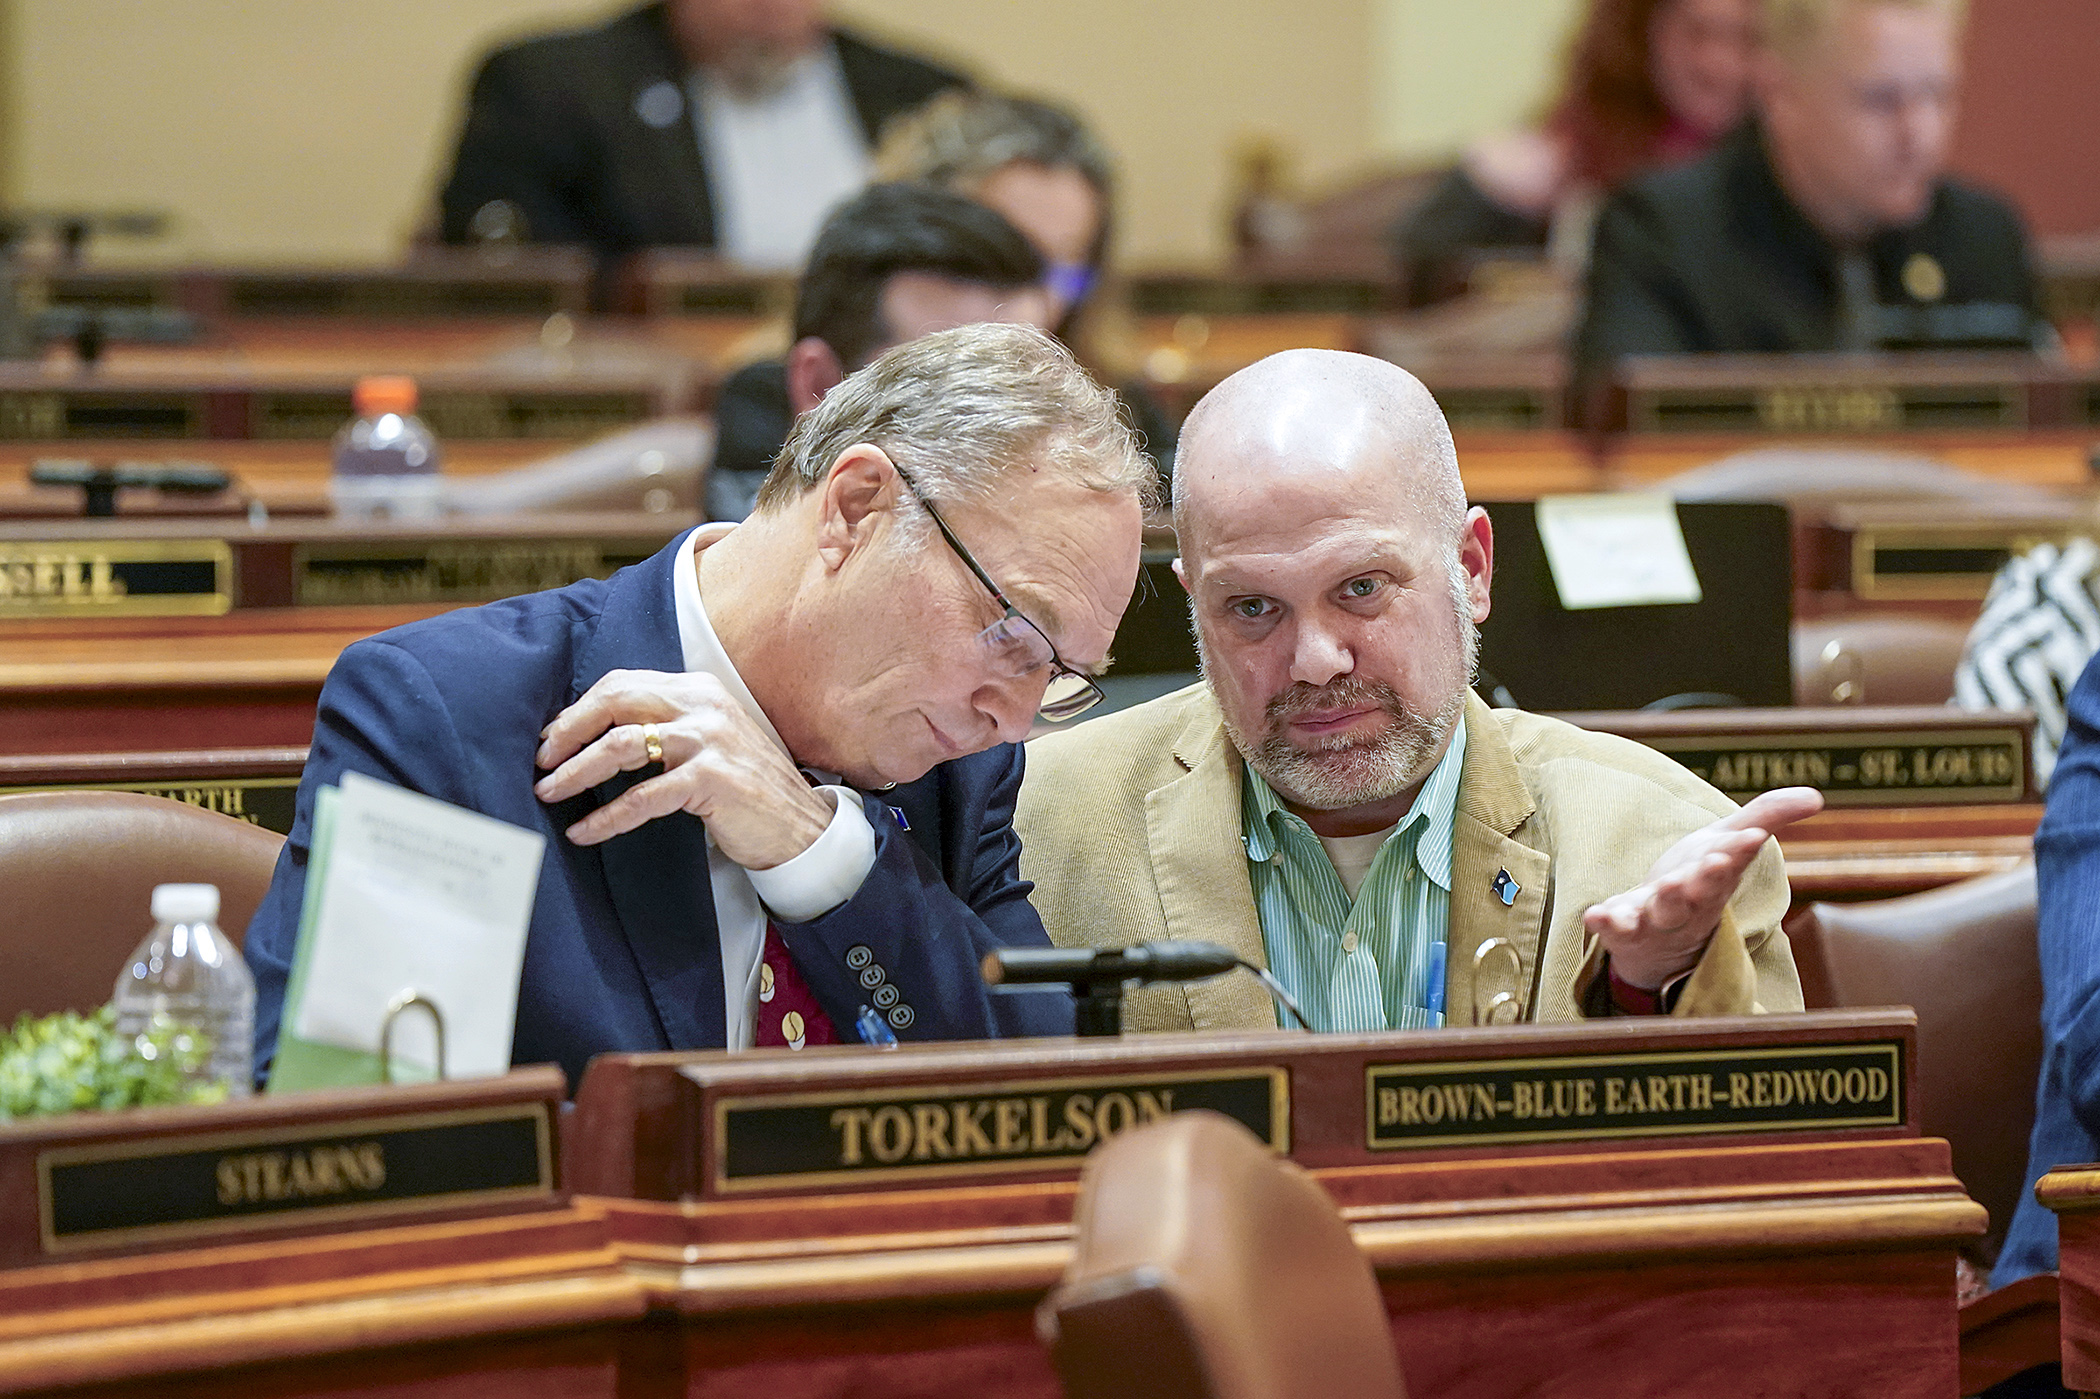 Rep. Paul Torkelson and Rep. Mike Freiberg discuss House business during an evening floor session Thursday. (Photo by Michele Jokinen)